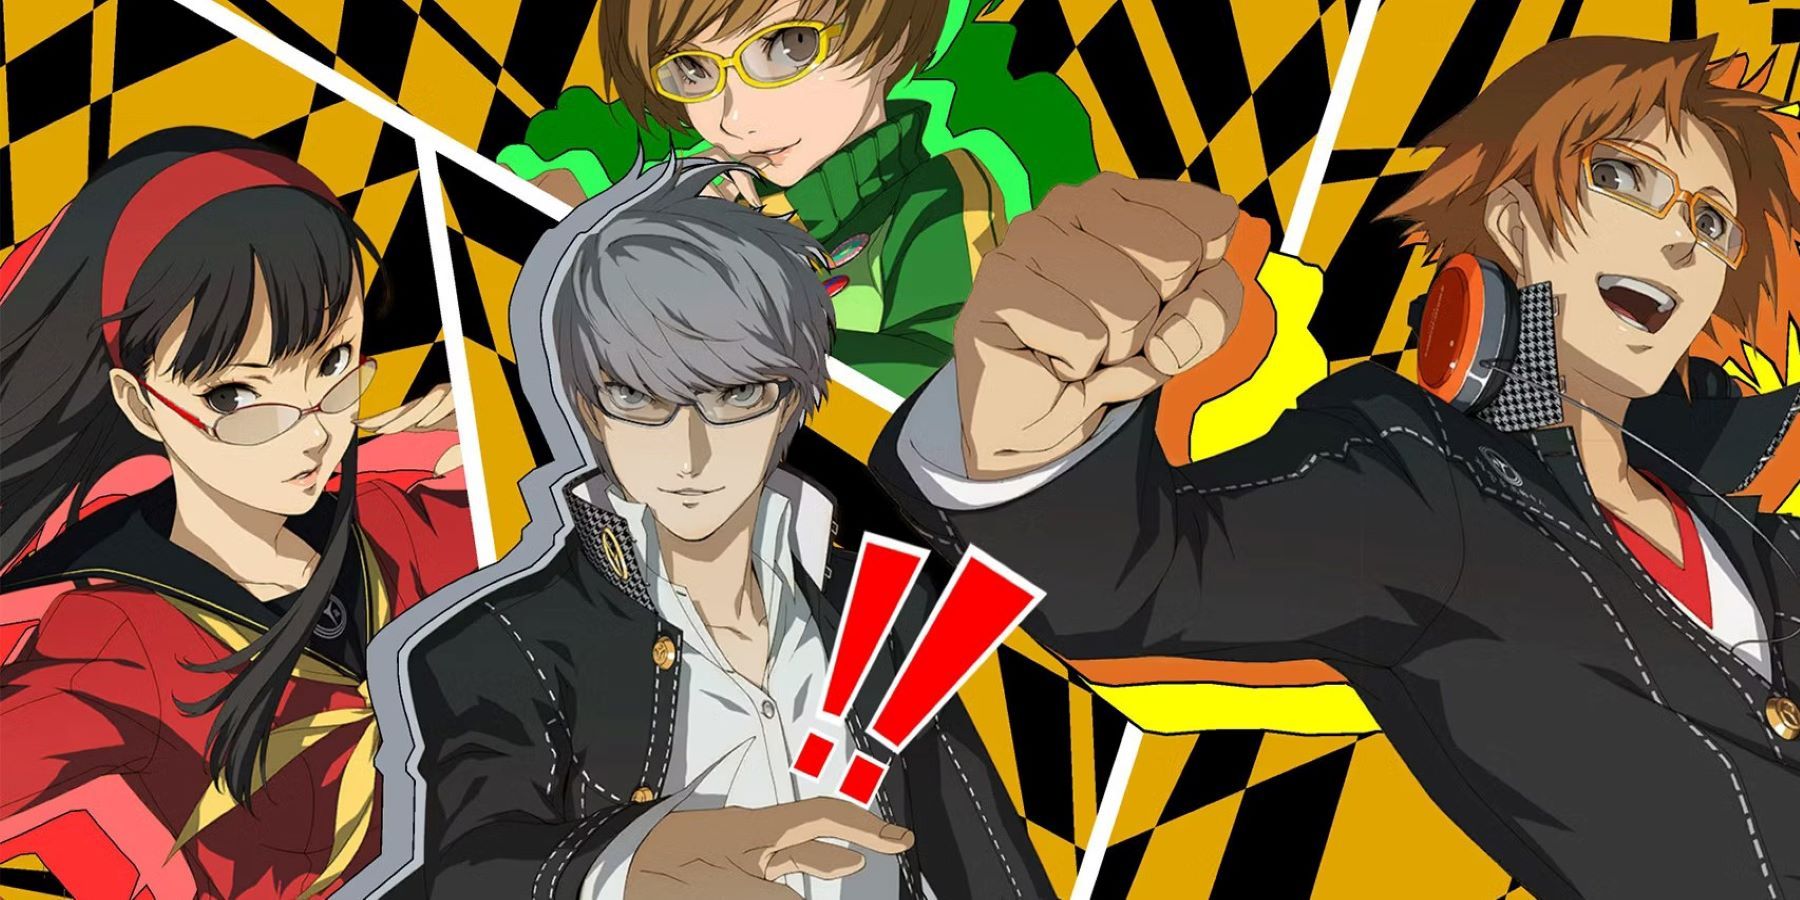 Yosuke, Yukiko, Chie, and Yu performing an All-Out Attack in Persona 4 Golden